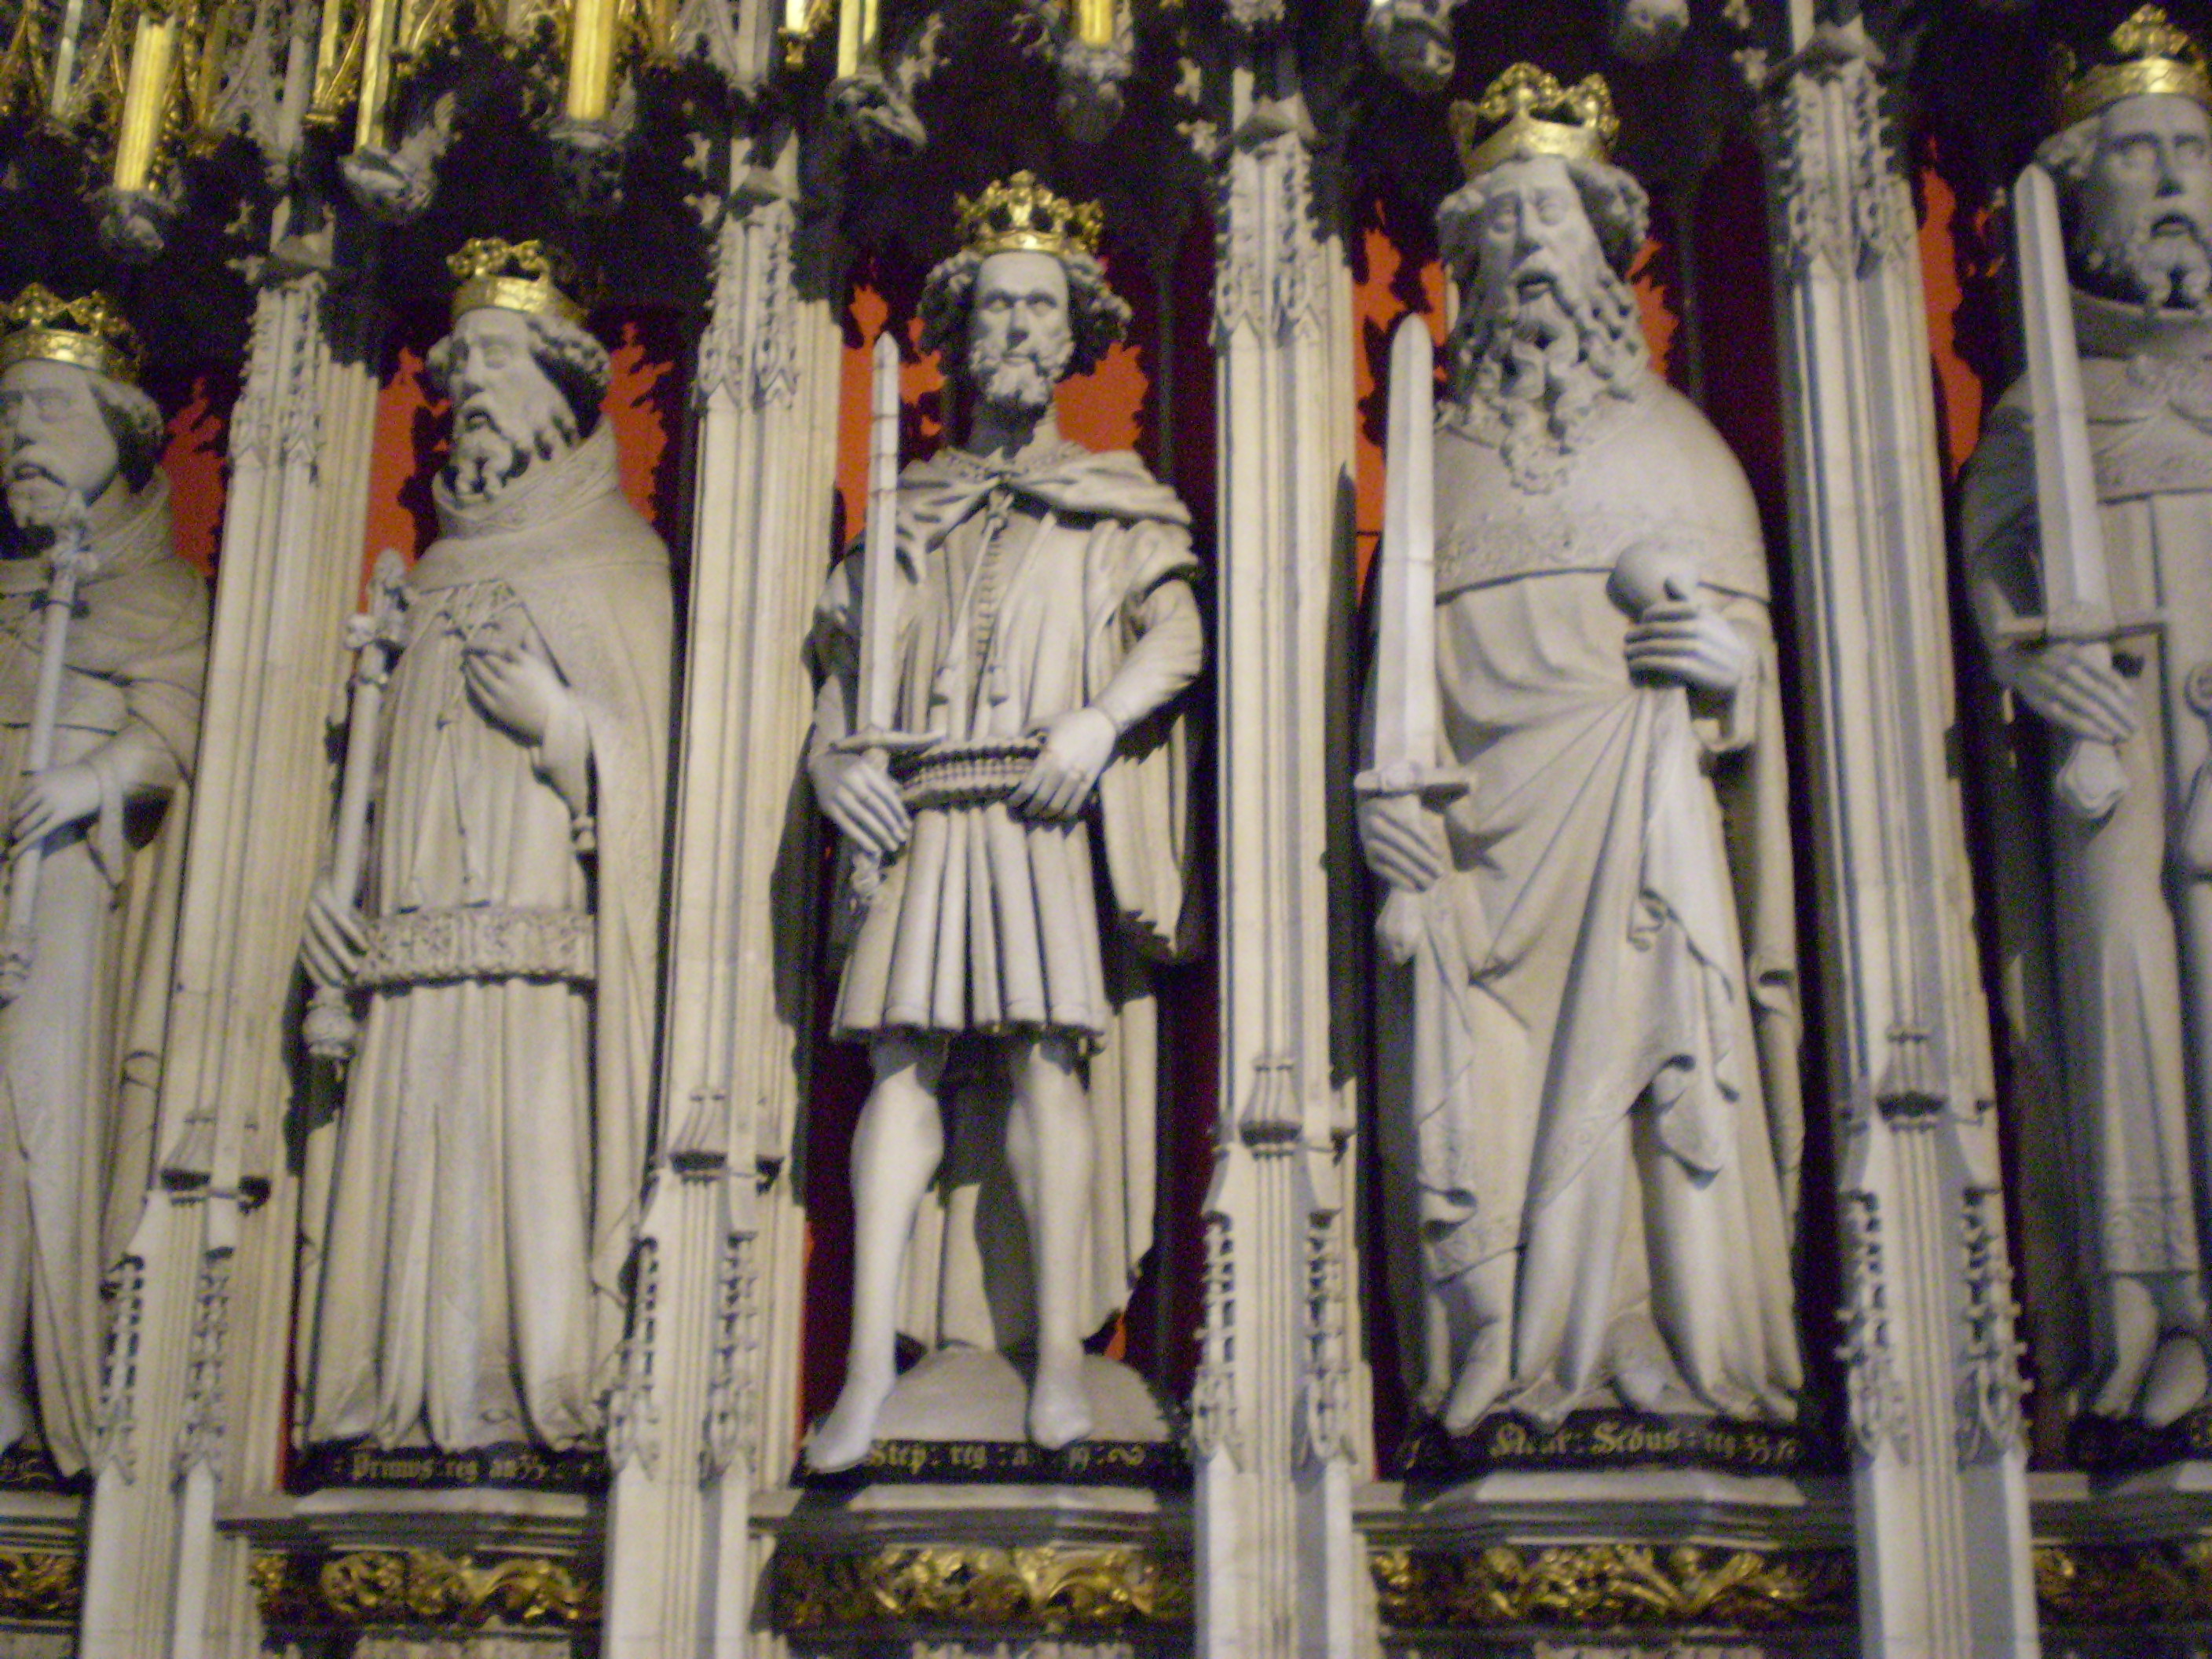 File:Statues of the Kings of England, York.jpg - Wikimedia Commons